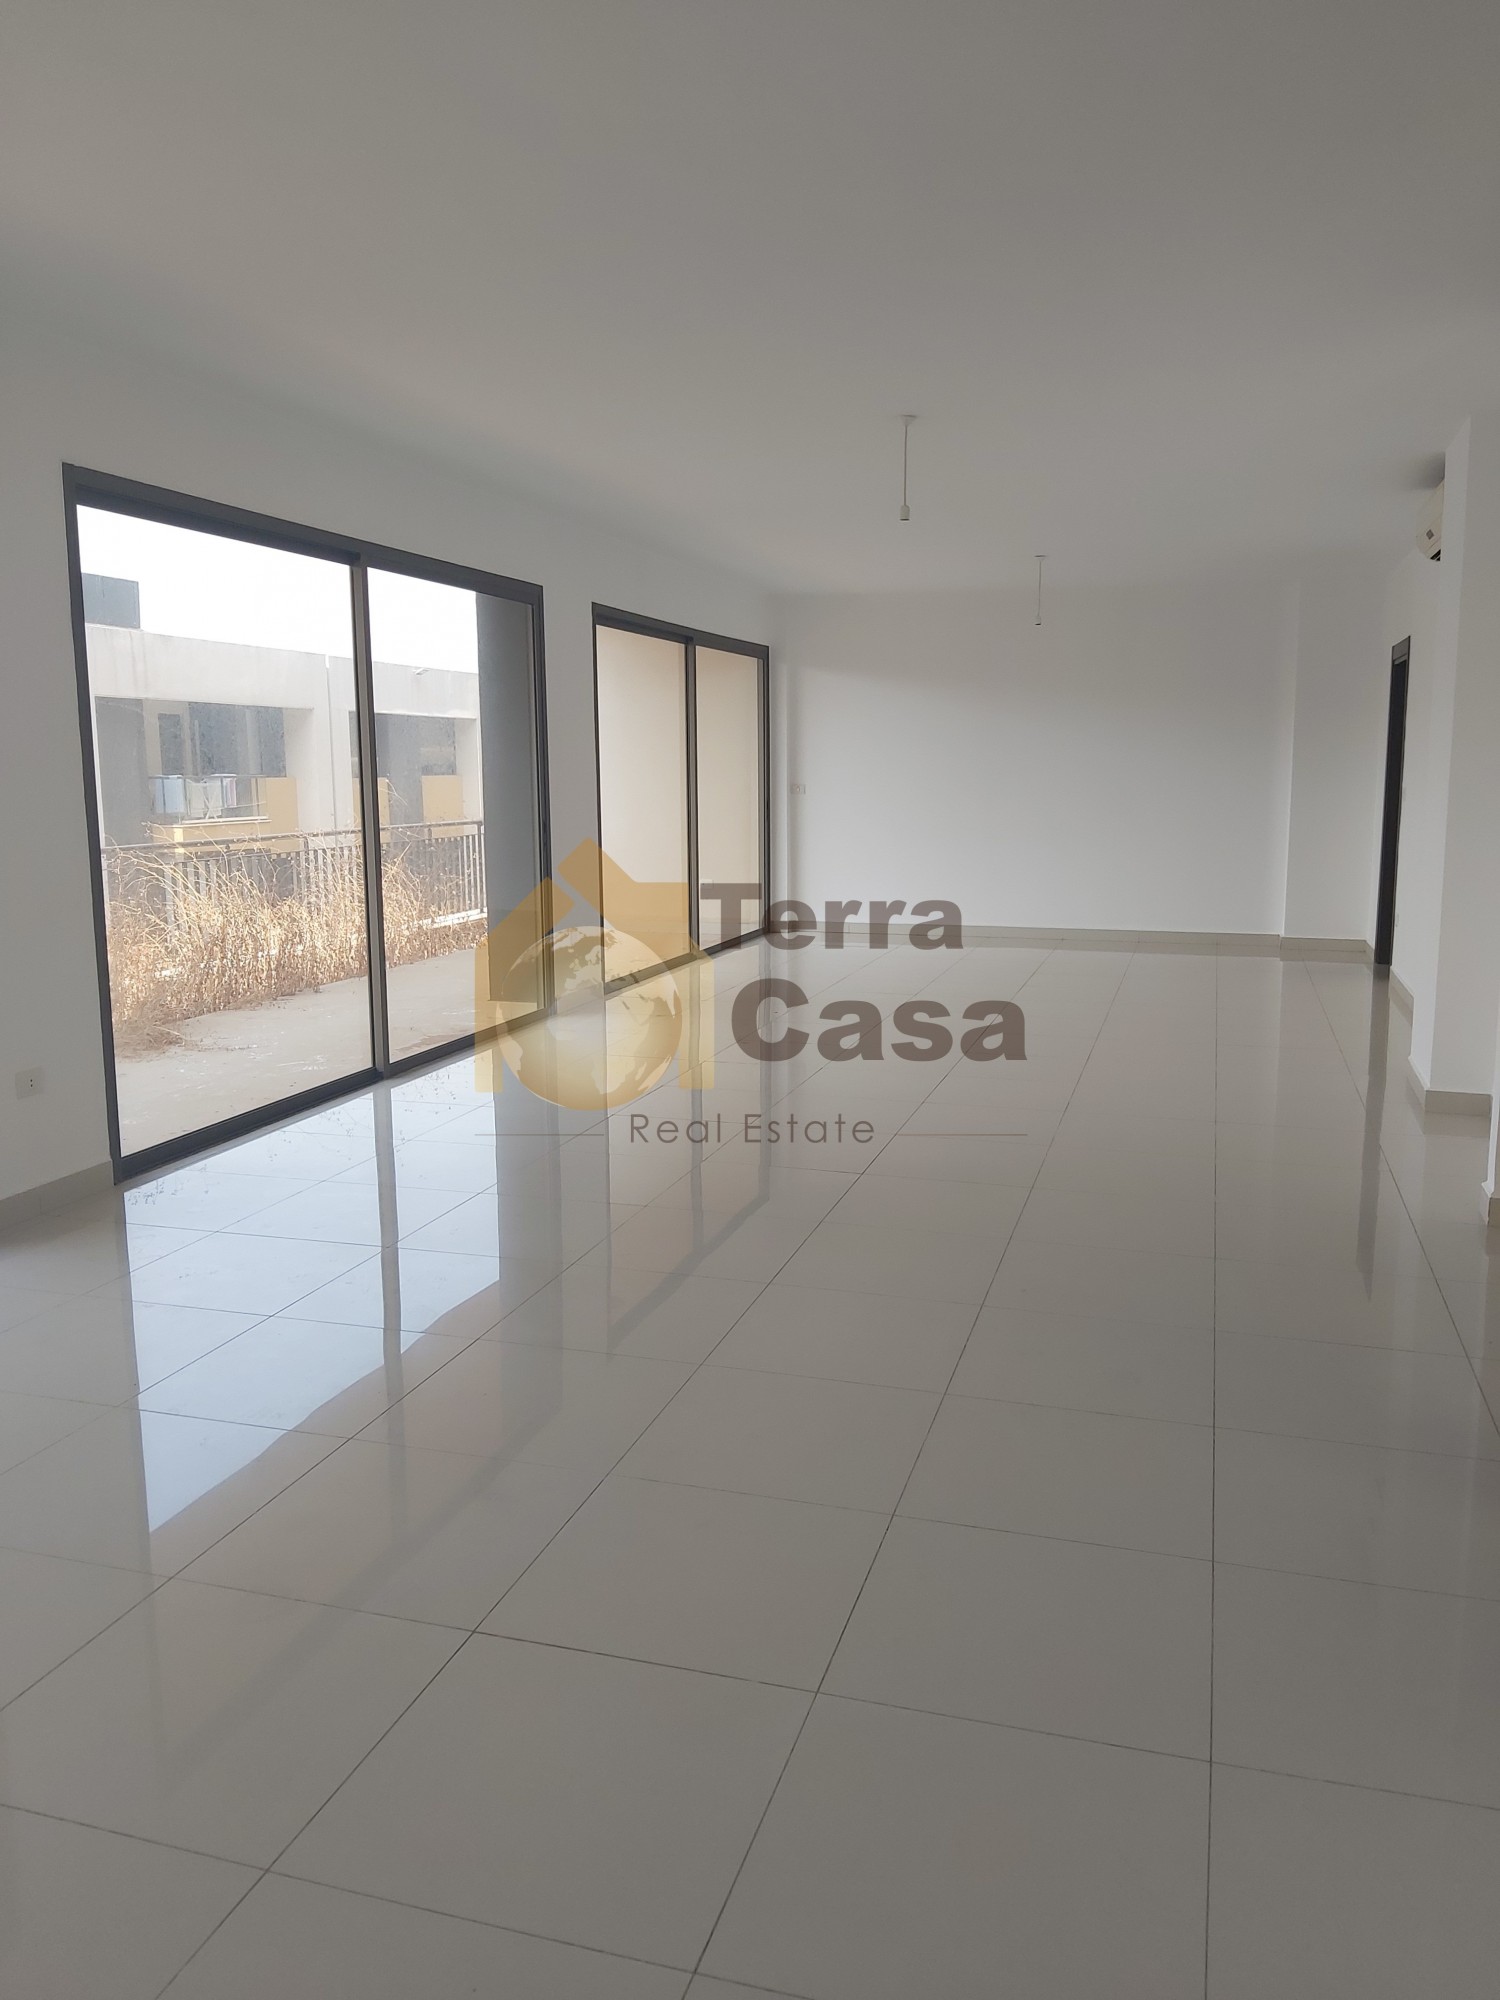 A 310sqm apartment with 225sqm garden for sale  bankers check accepted